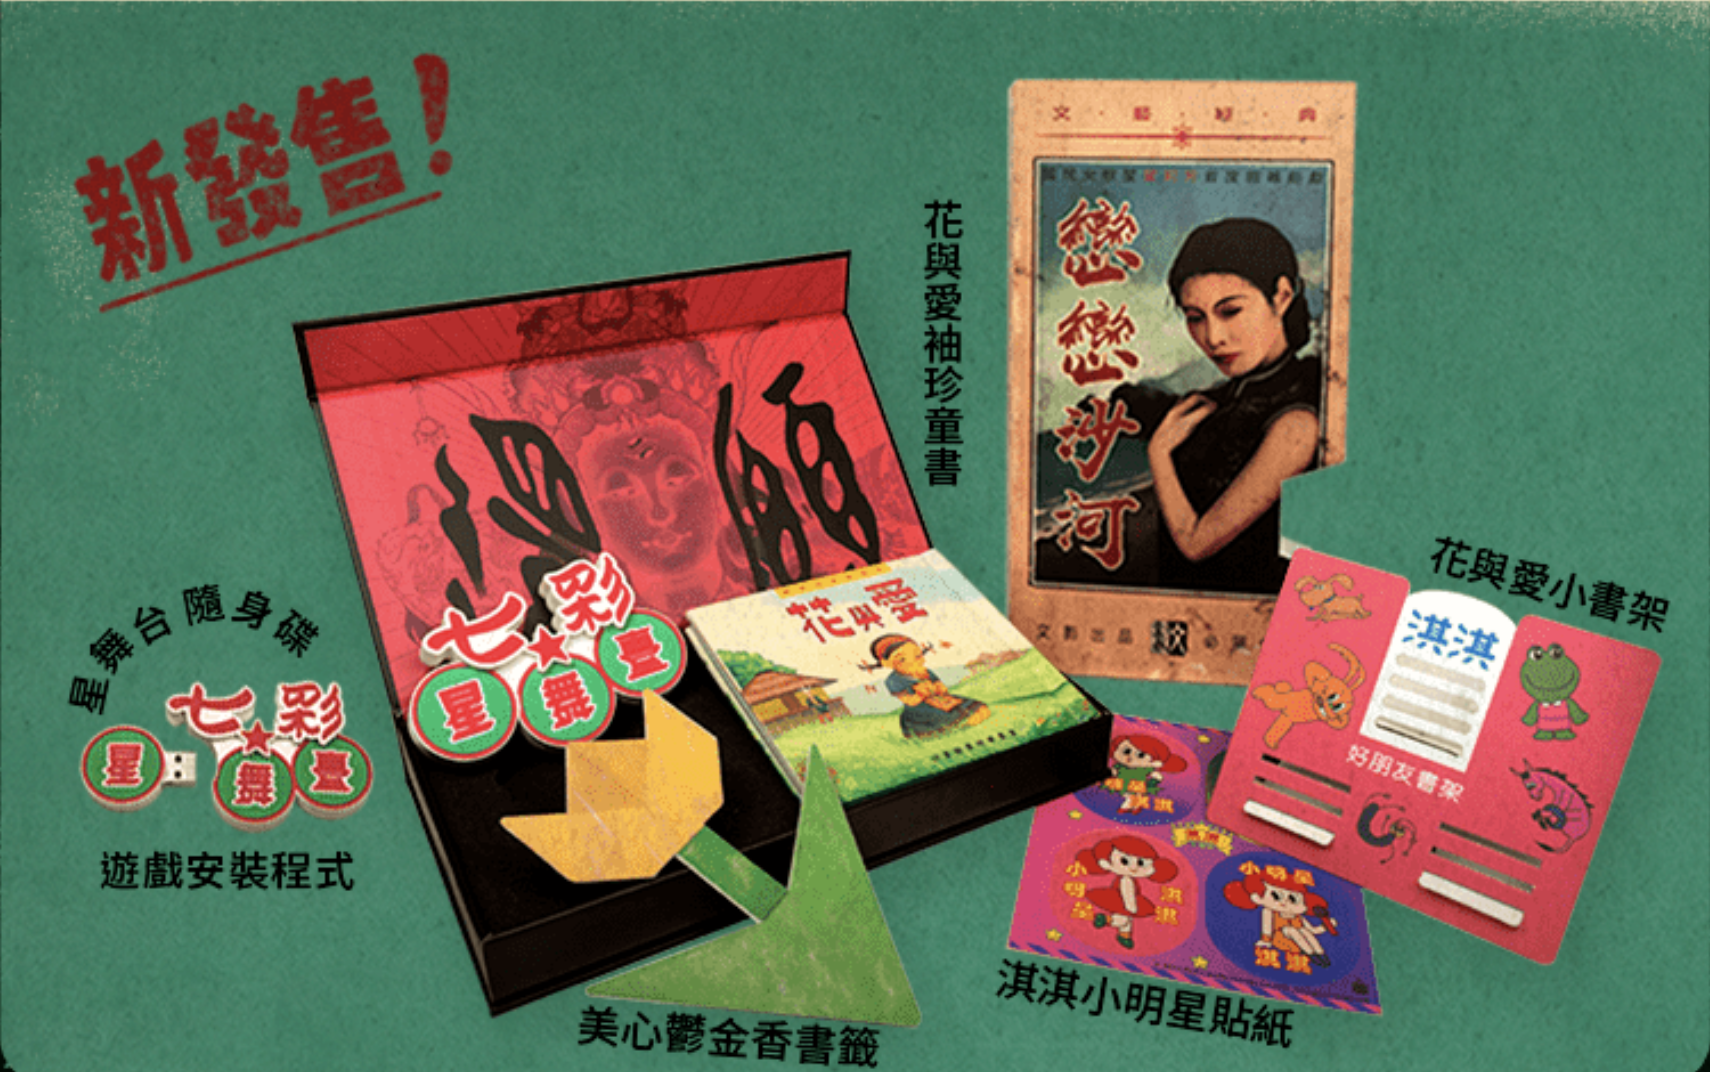 The developer didn’t specify whether the physical re-release will contain the original references to Chinese President Xi Jinping. (Picture: Red Candle Games)